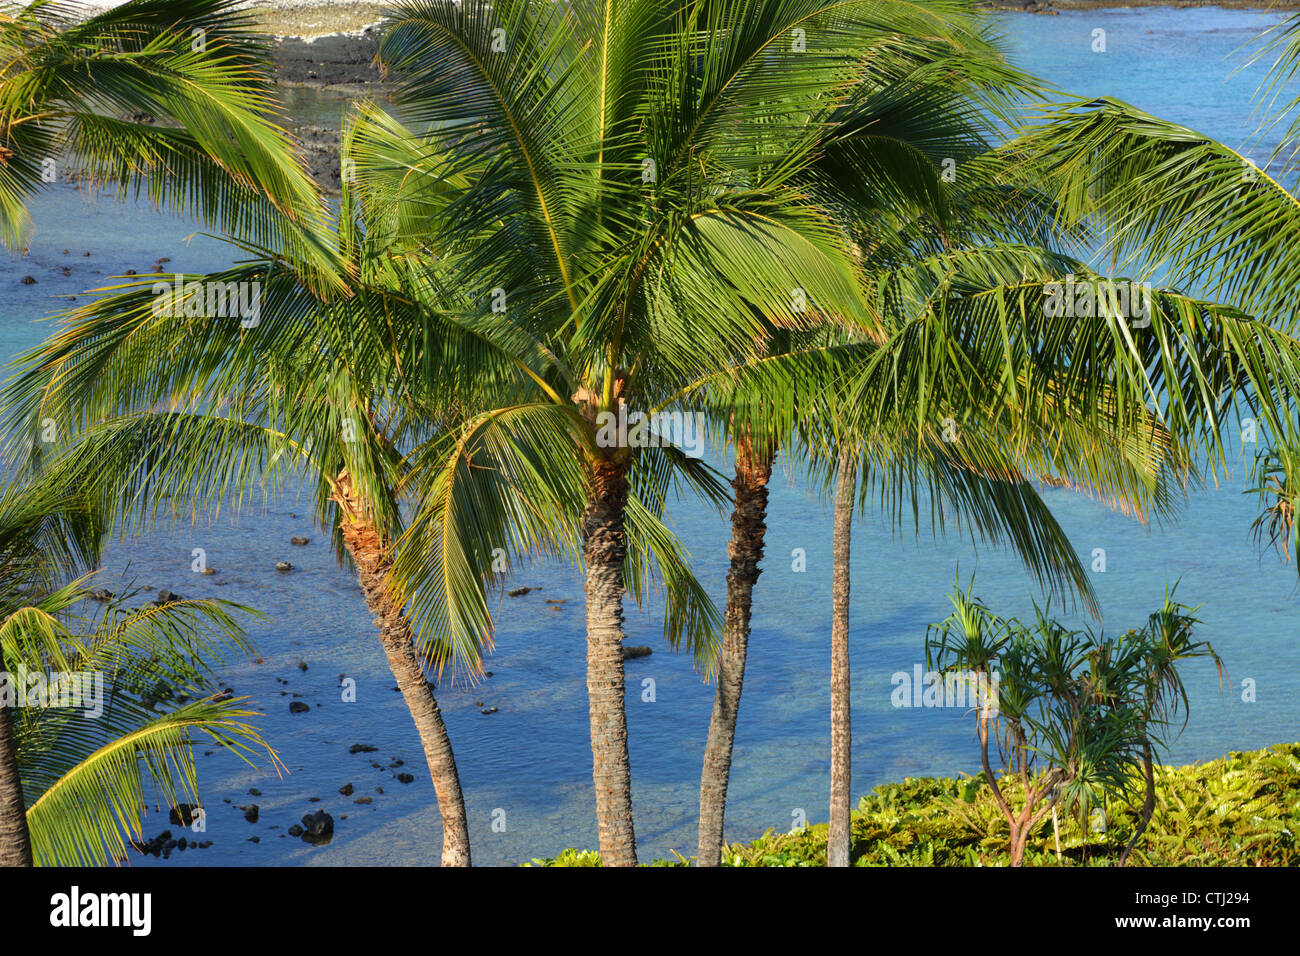 Palm trees and Pacific Ocean, Hawaii Stock Photo